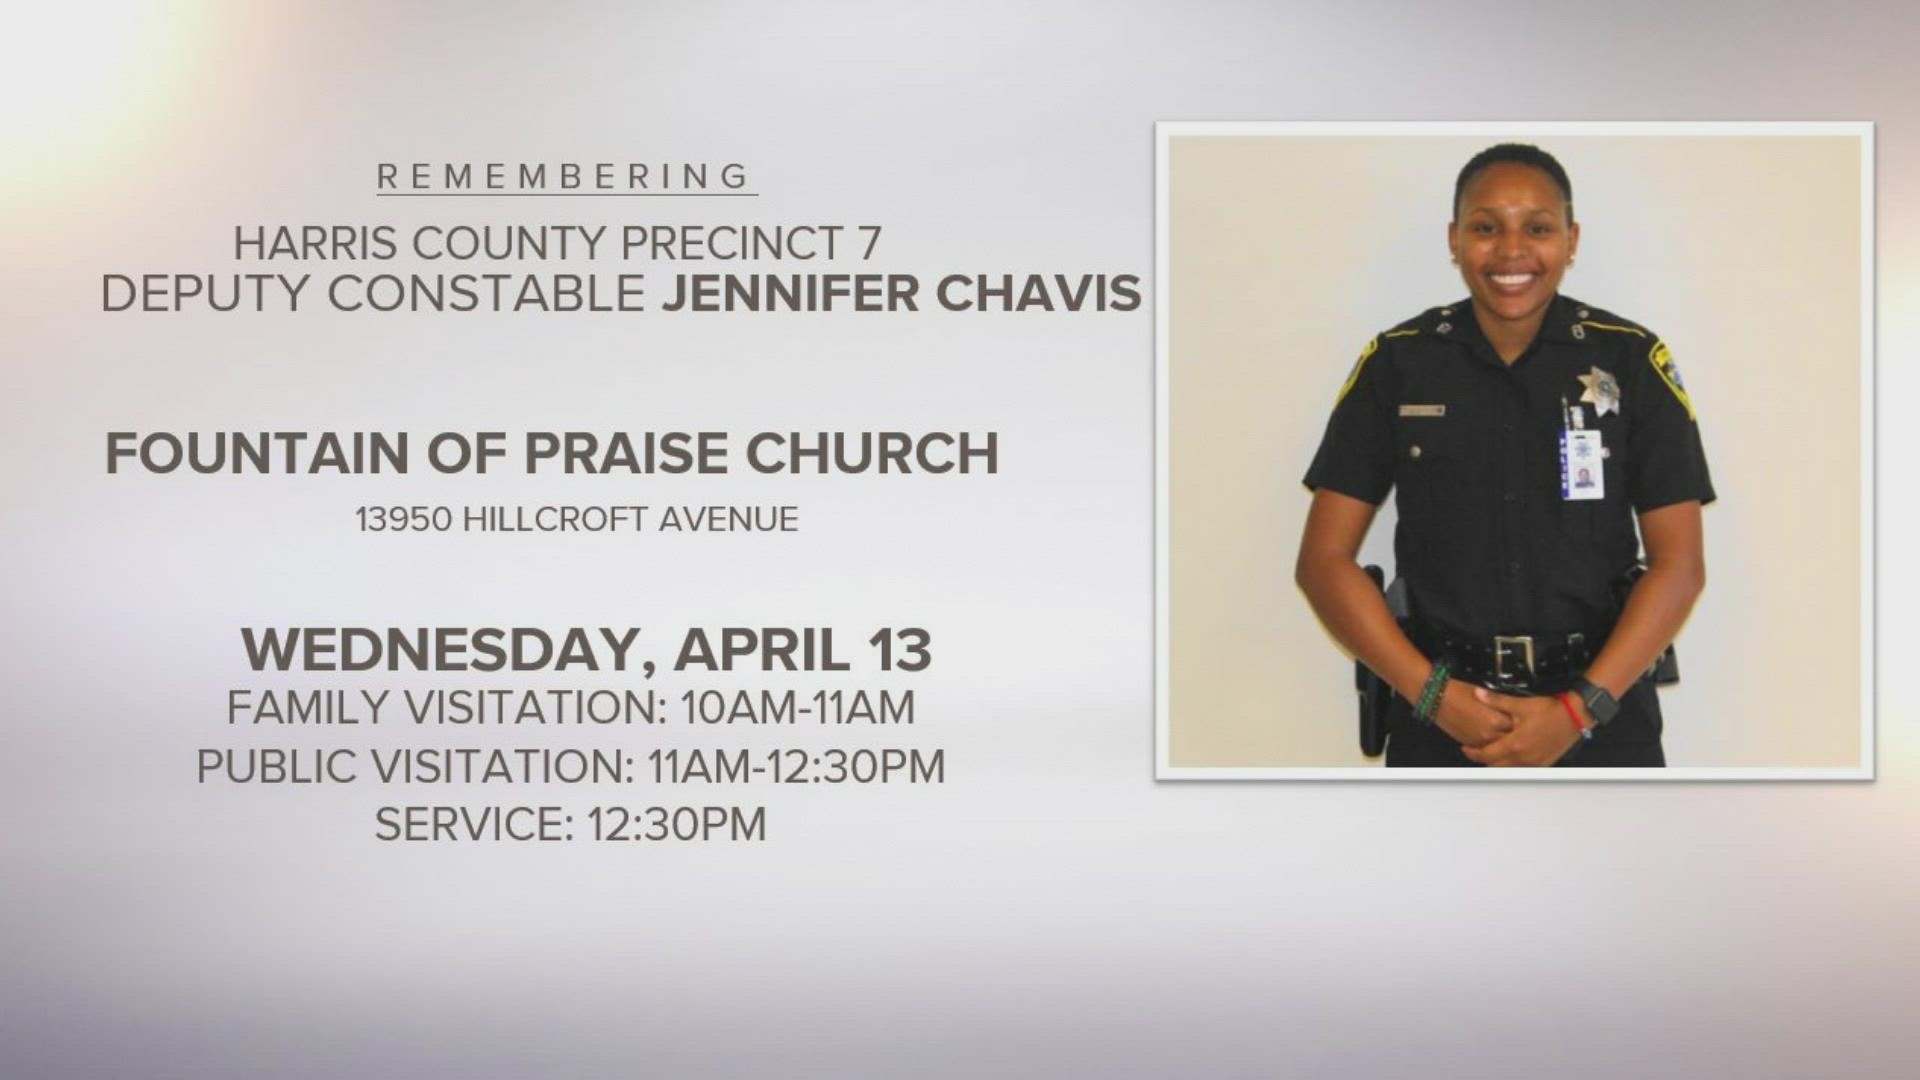 The funeral will be held on Wednesday, April 13 at Fountain of Praise Church.